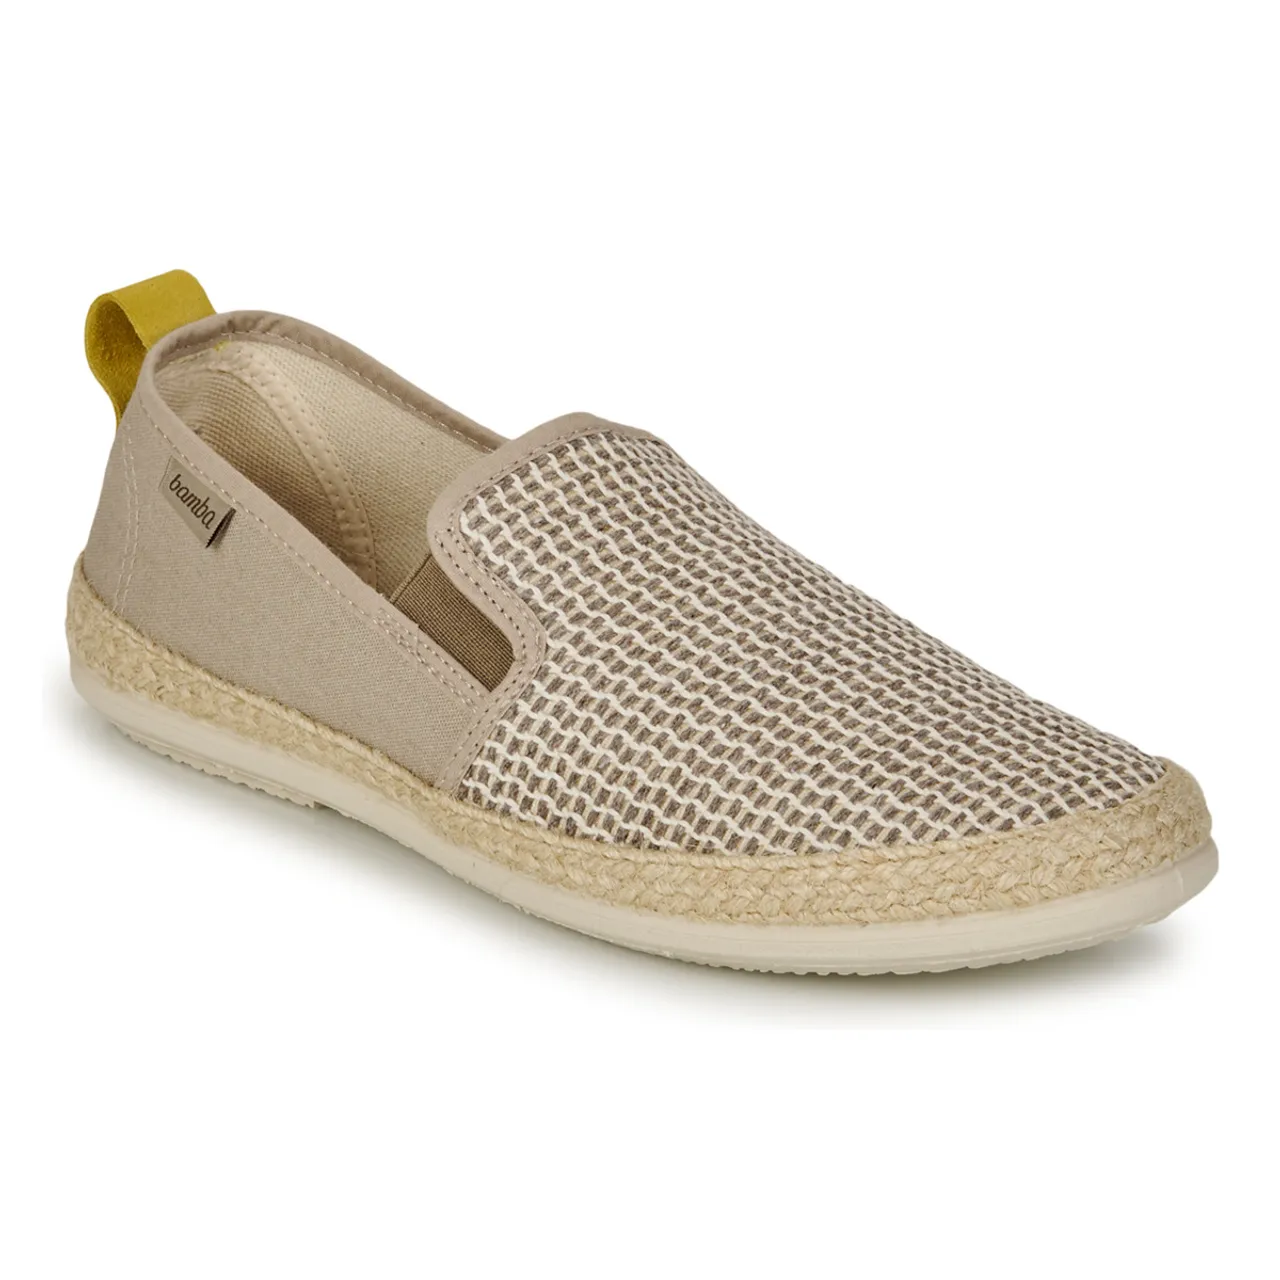 Bamba By Victoria  ANDRE  men's Espadrilles / Casual Shoes in Beige